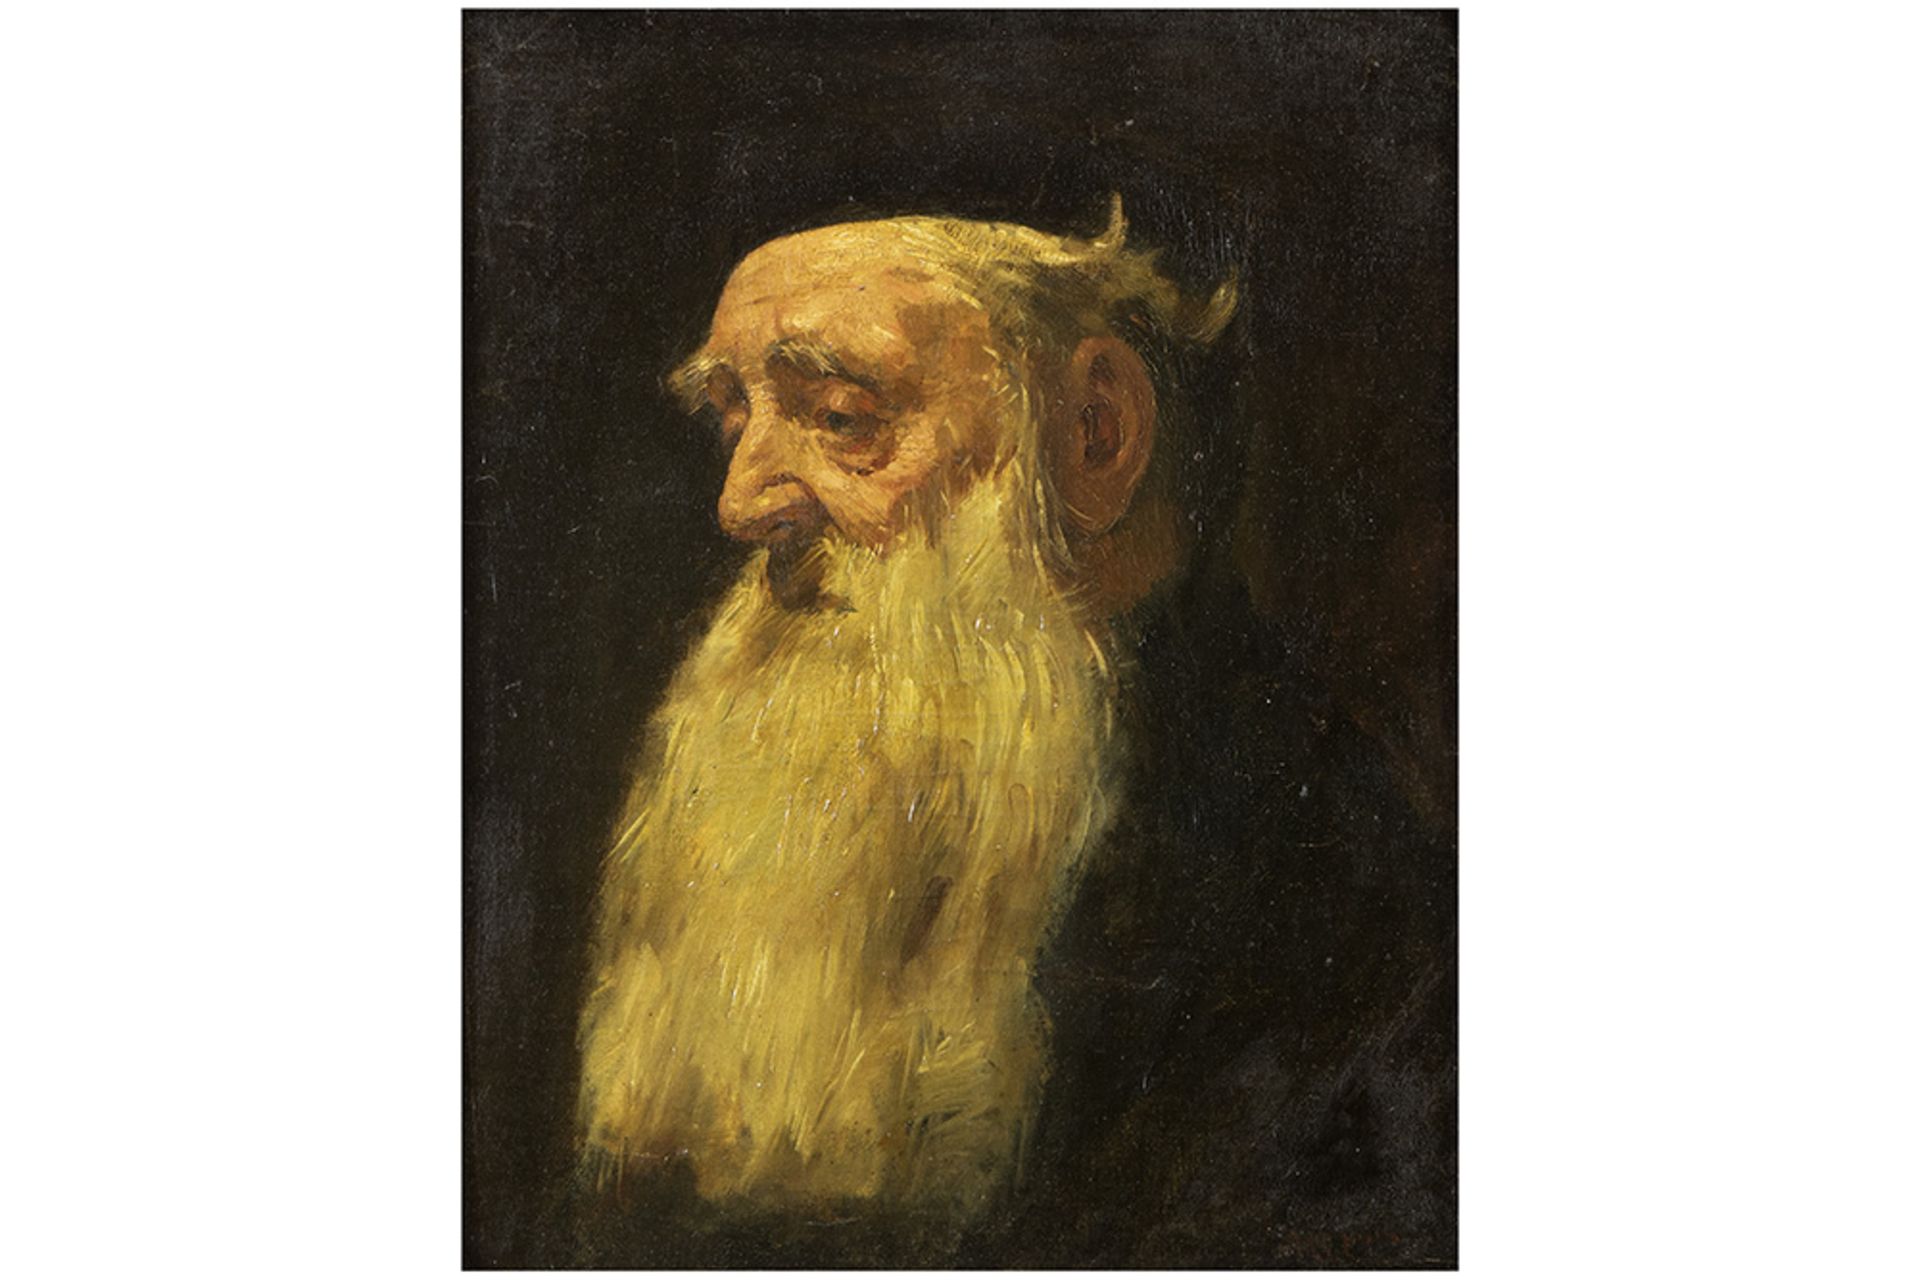 19th Cent. oil on canvas - signed / attributed to Jozef Israels || ISRAELS JOZEF (1824 - 1911)